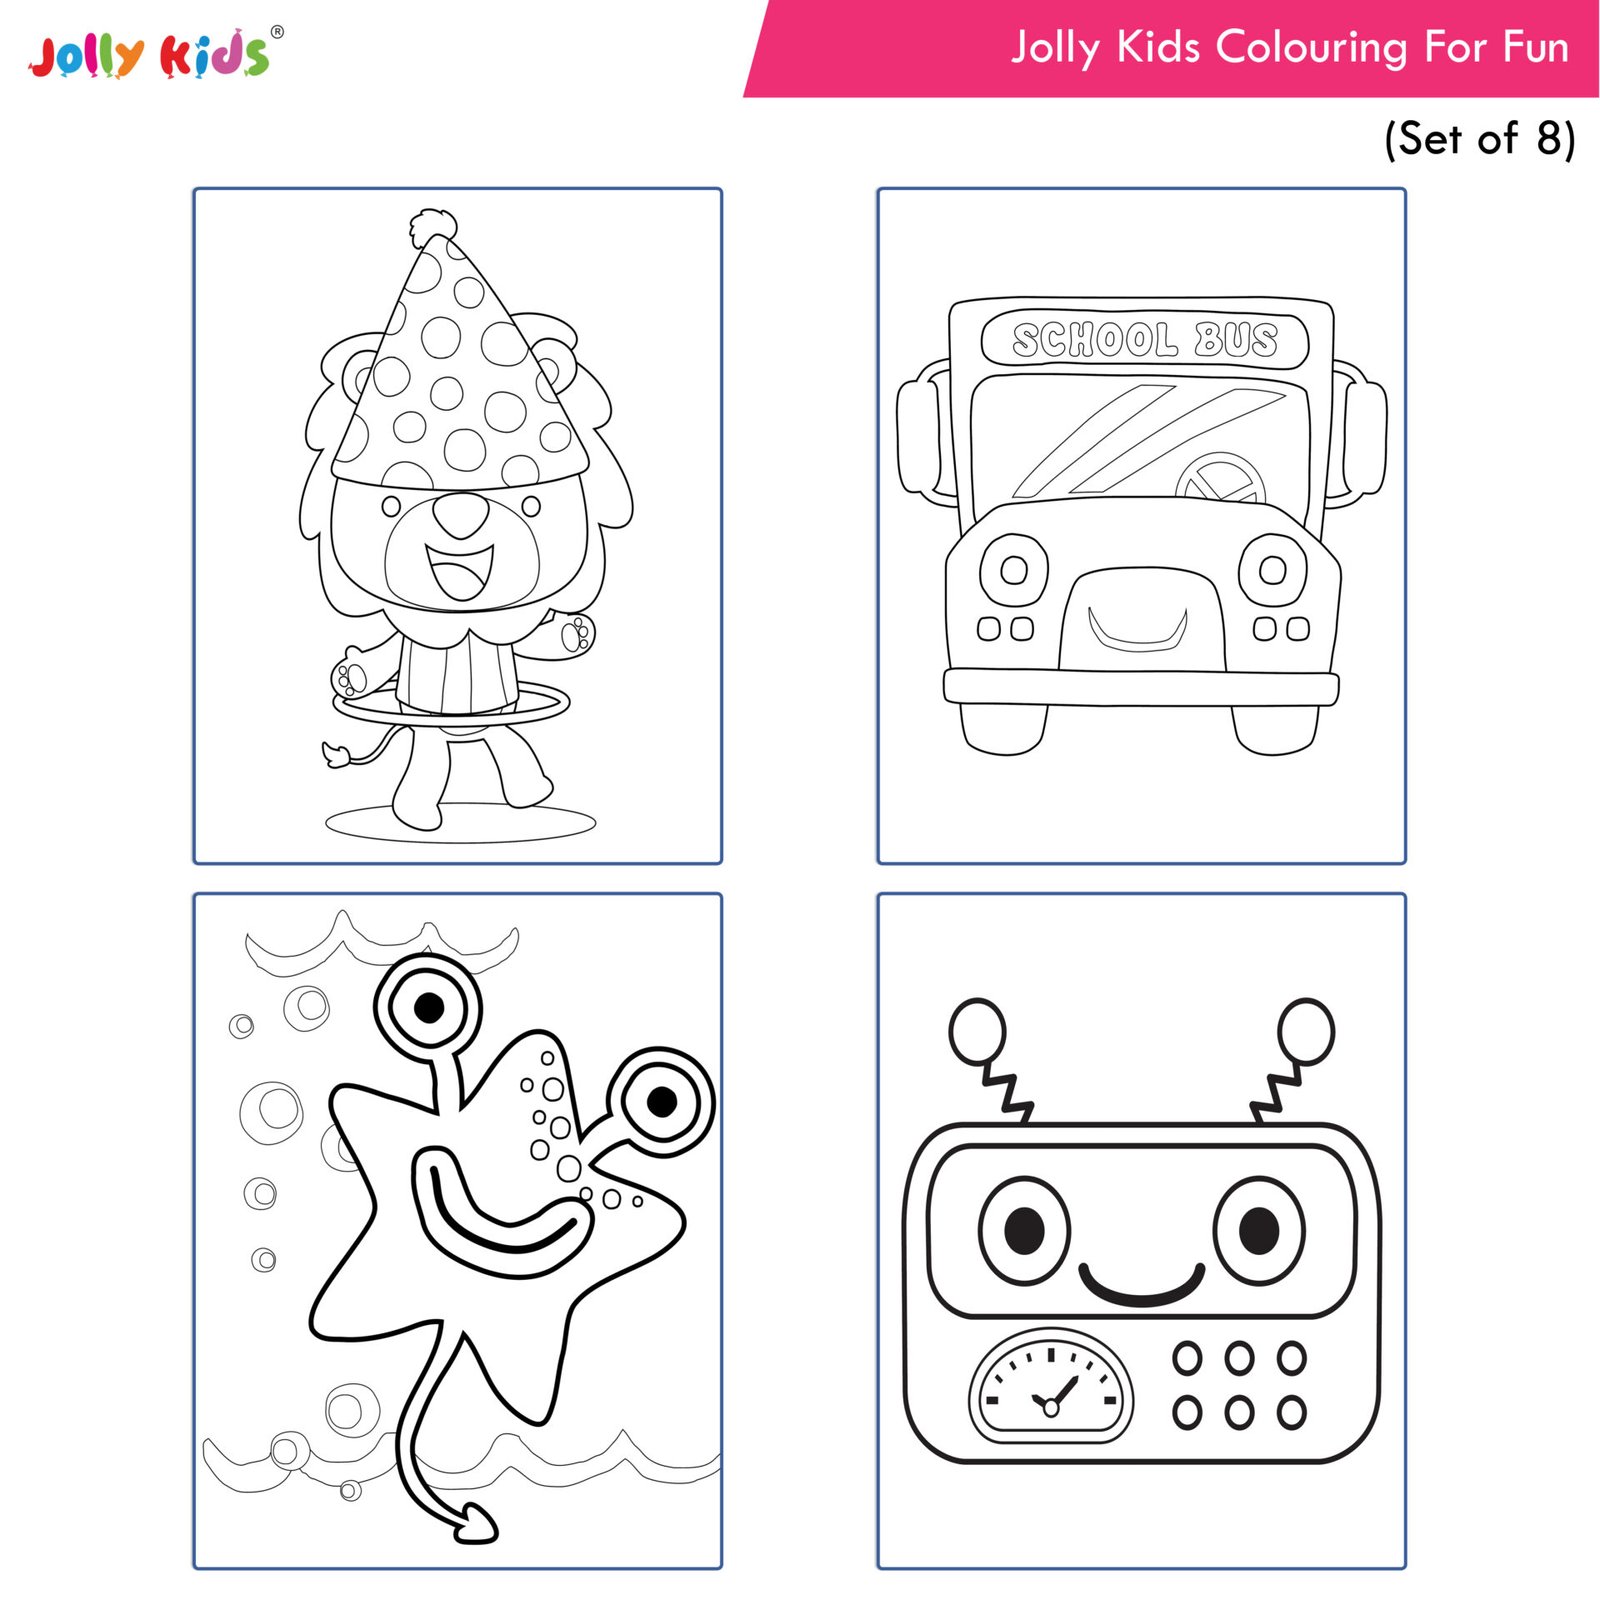 Jolly Kids Colouring For Fun Book Set of 8 9